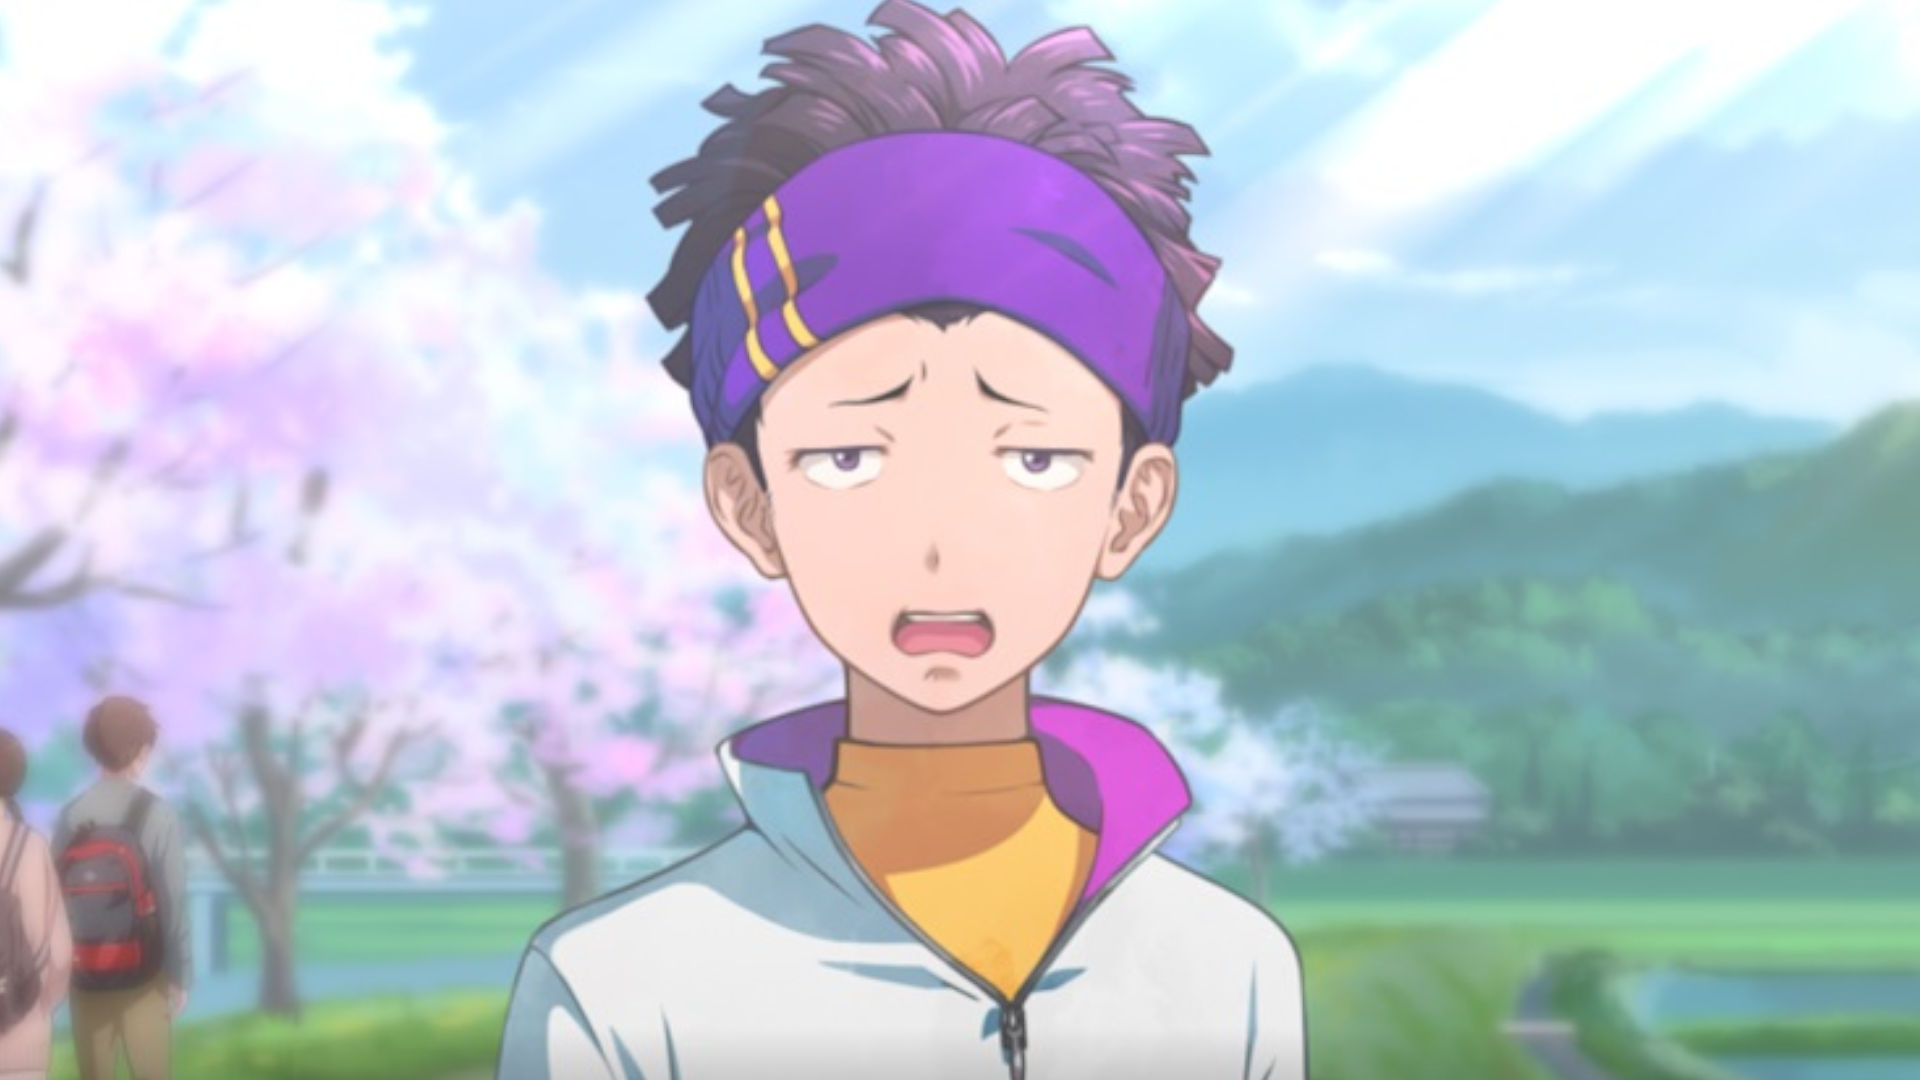 Can I save Ryo in Digimon Survive?